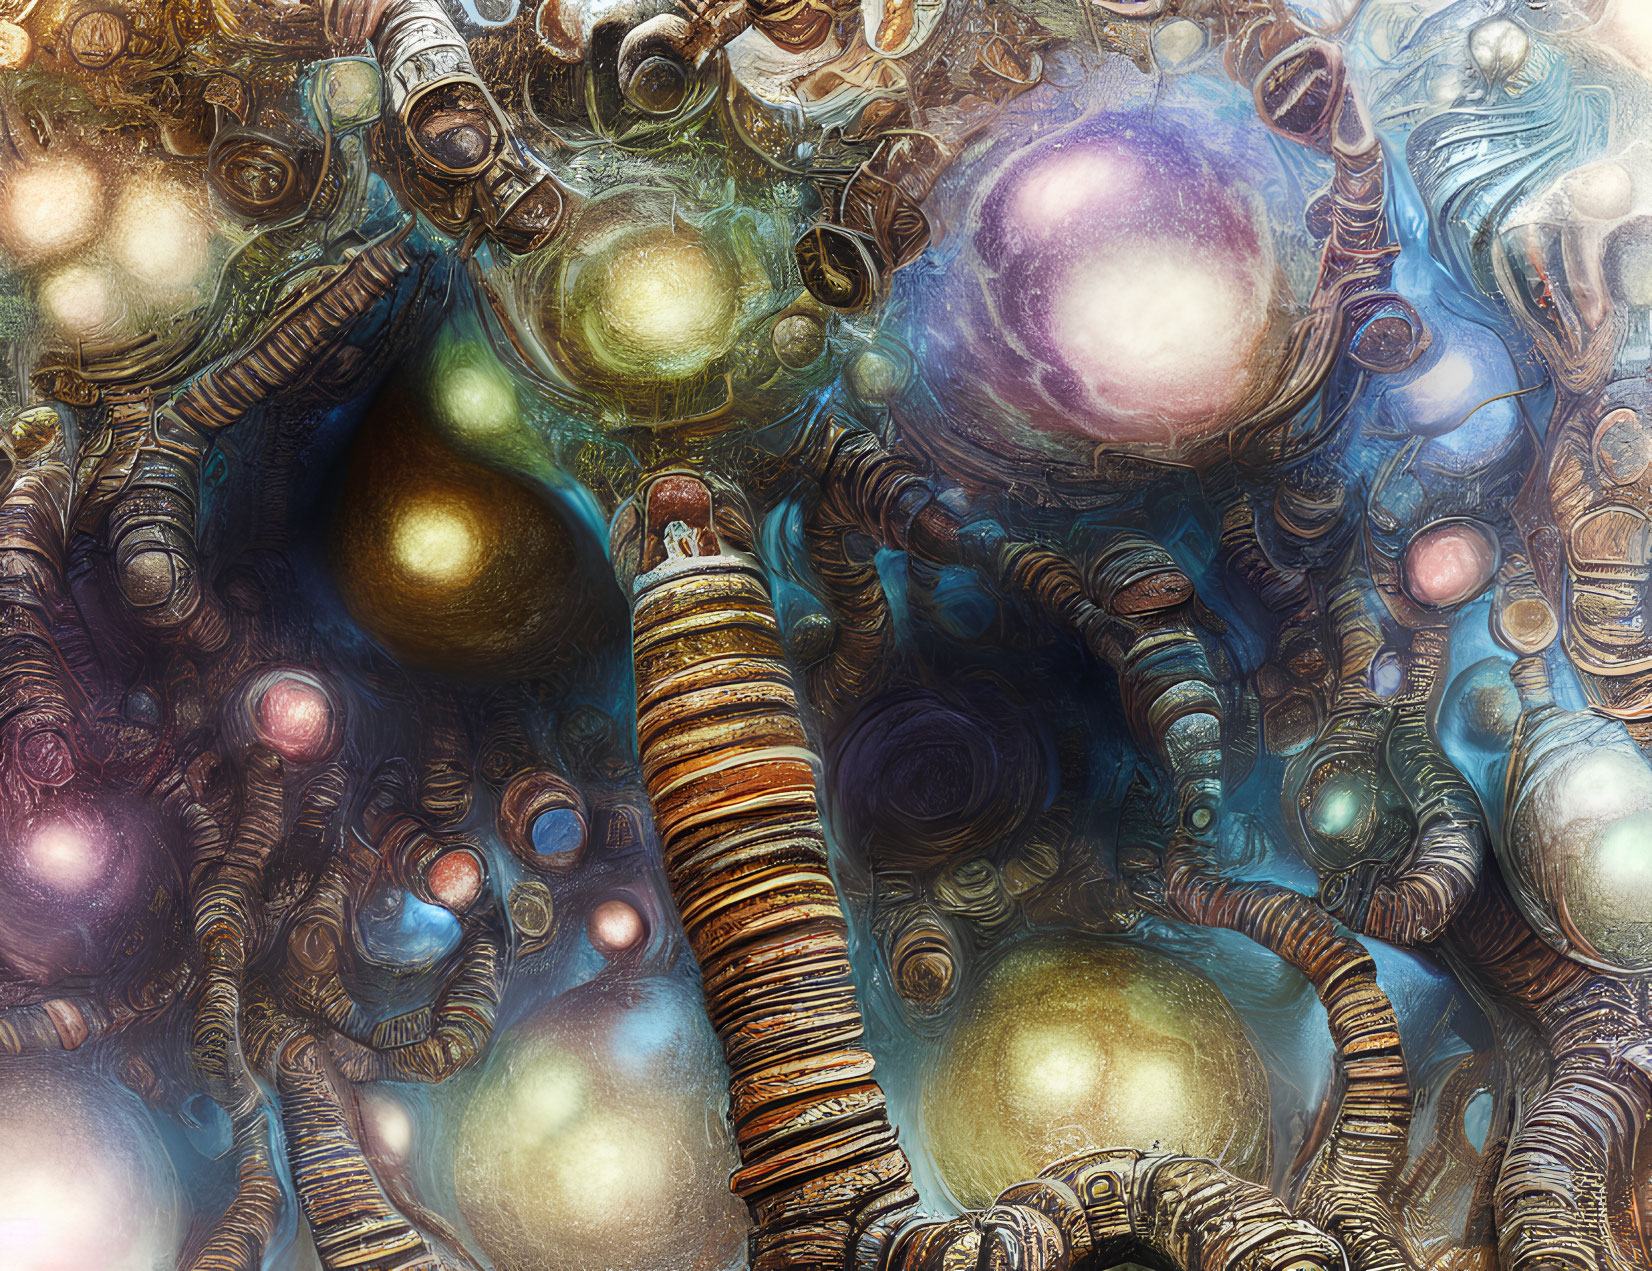 Detailed Fractal Image: Cosmic Metallic Structures and Spheres in Various Colors